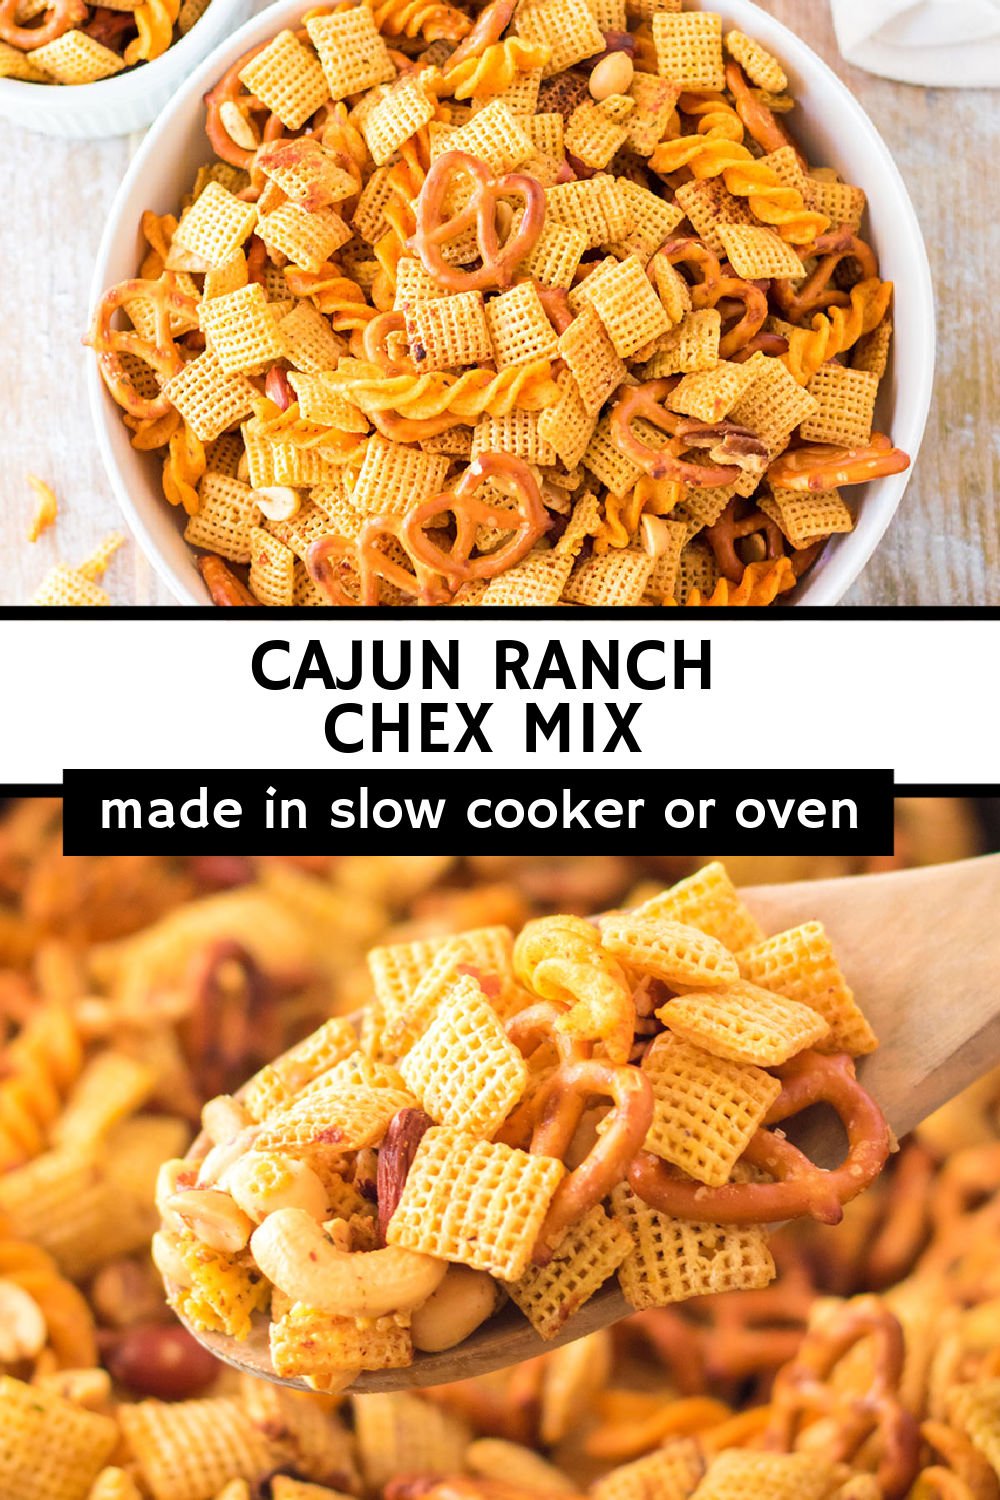 Cajun Chex Mix - bold, spicy, and full of texture. This party Chex mix recipe has everything -  a flavorful cajun spice blend paired with garlic, onion, butter, and ranch seasoning for a snack experience your guests will never forget! Throw it in the slow cooker, heat, and serve. | www.persnicketyplates.com